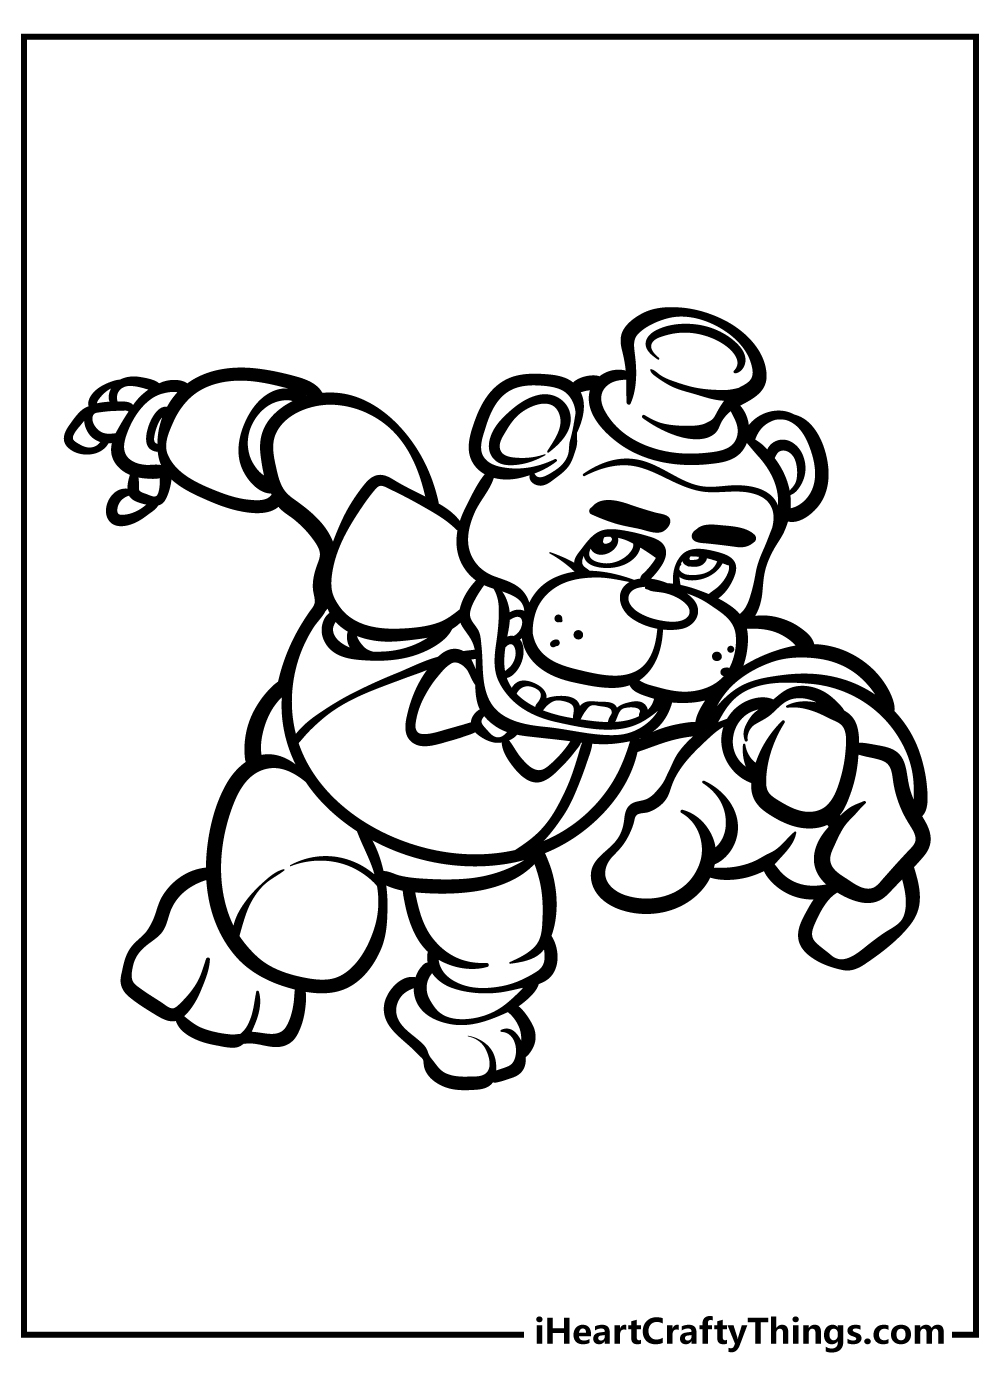 Five Nights At Freddy’s coloring pages free printable